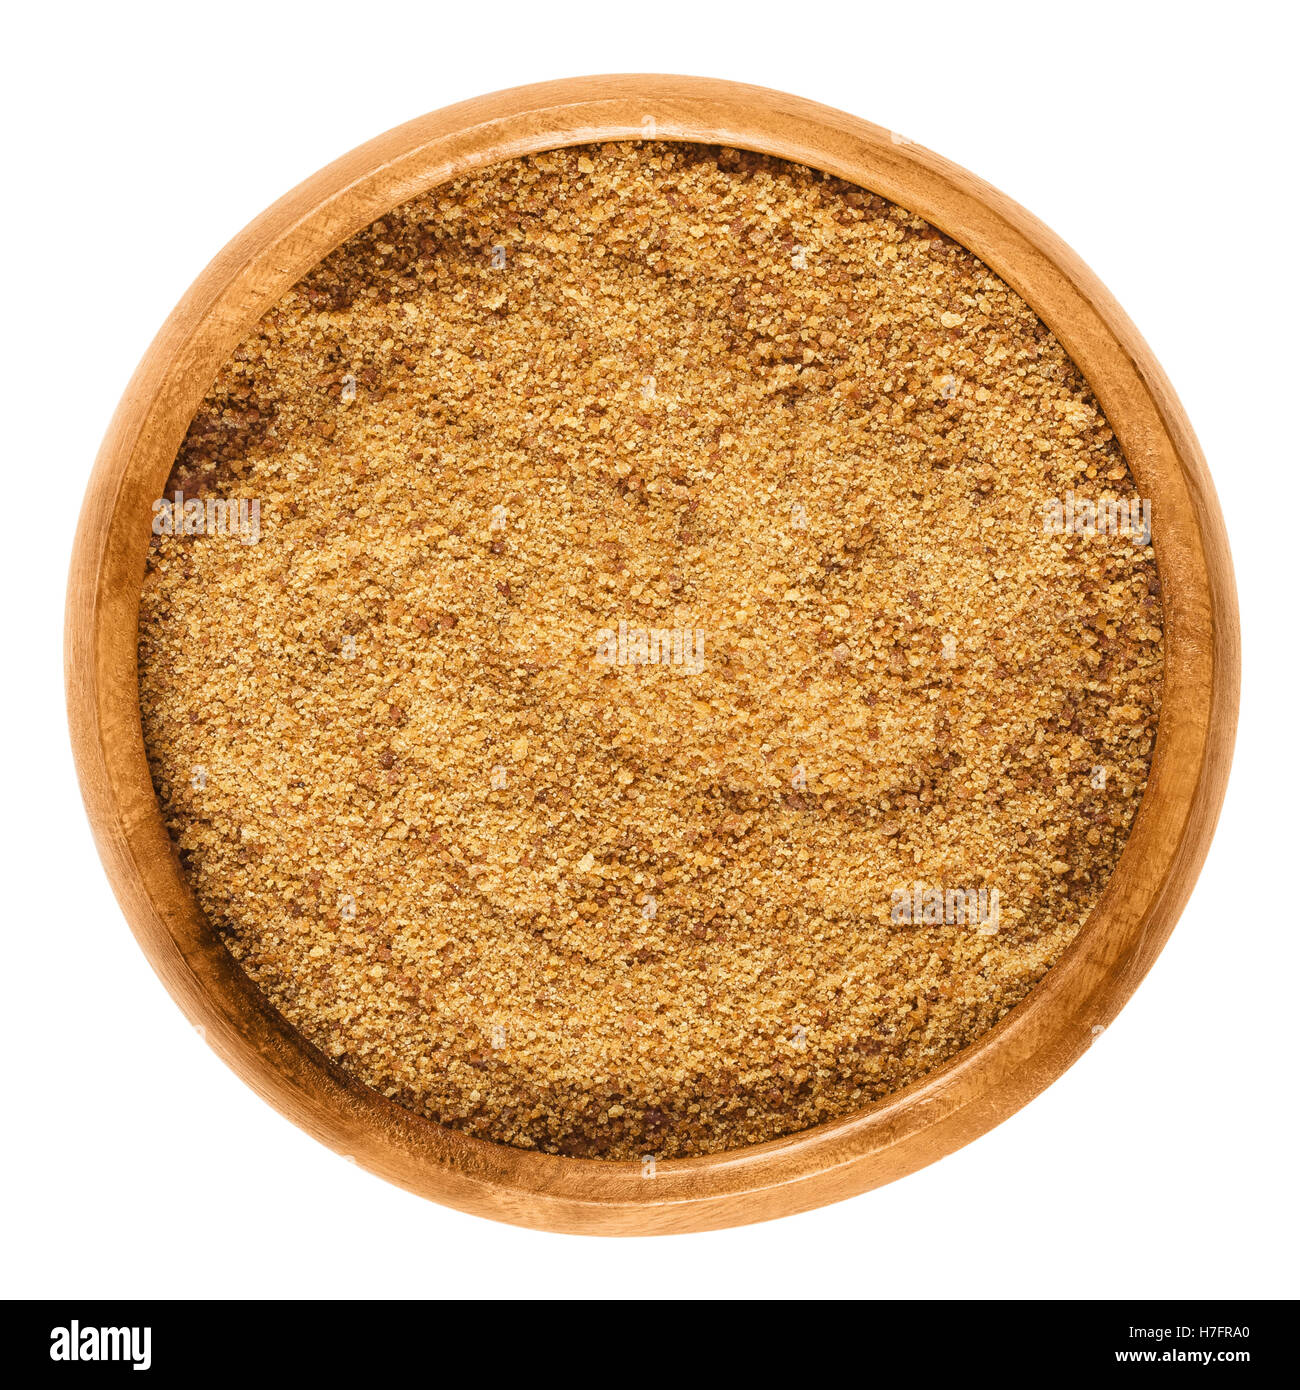 Dark coconut blossom sugar in a wooden bowl on white background. Raw brown unrefined sugar from the coconut palm. Stock Photo